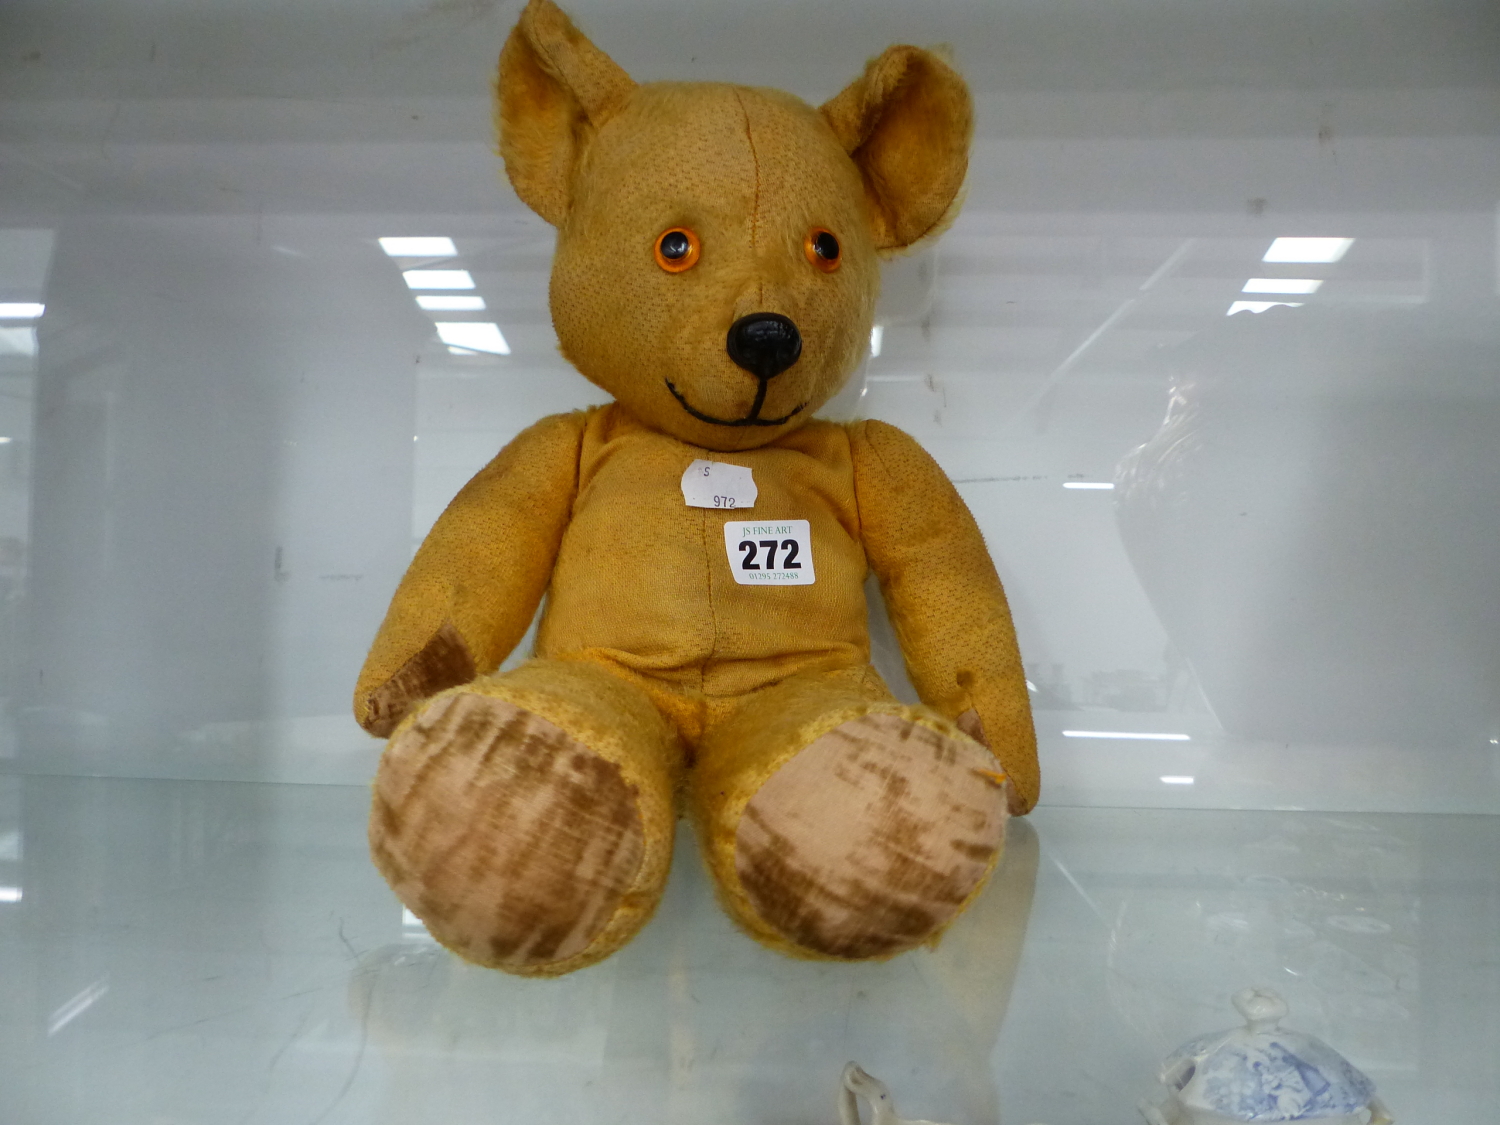 A VINTAGE JOINTED TEDDY BEAR